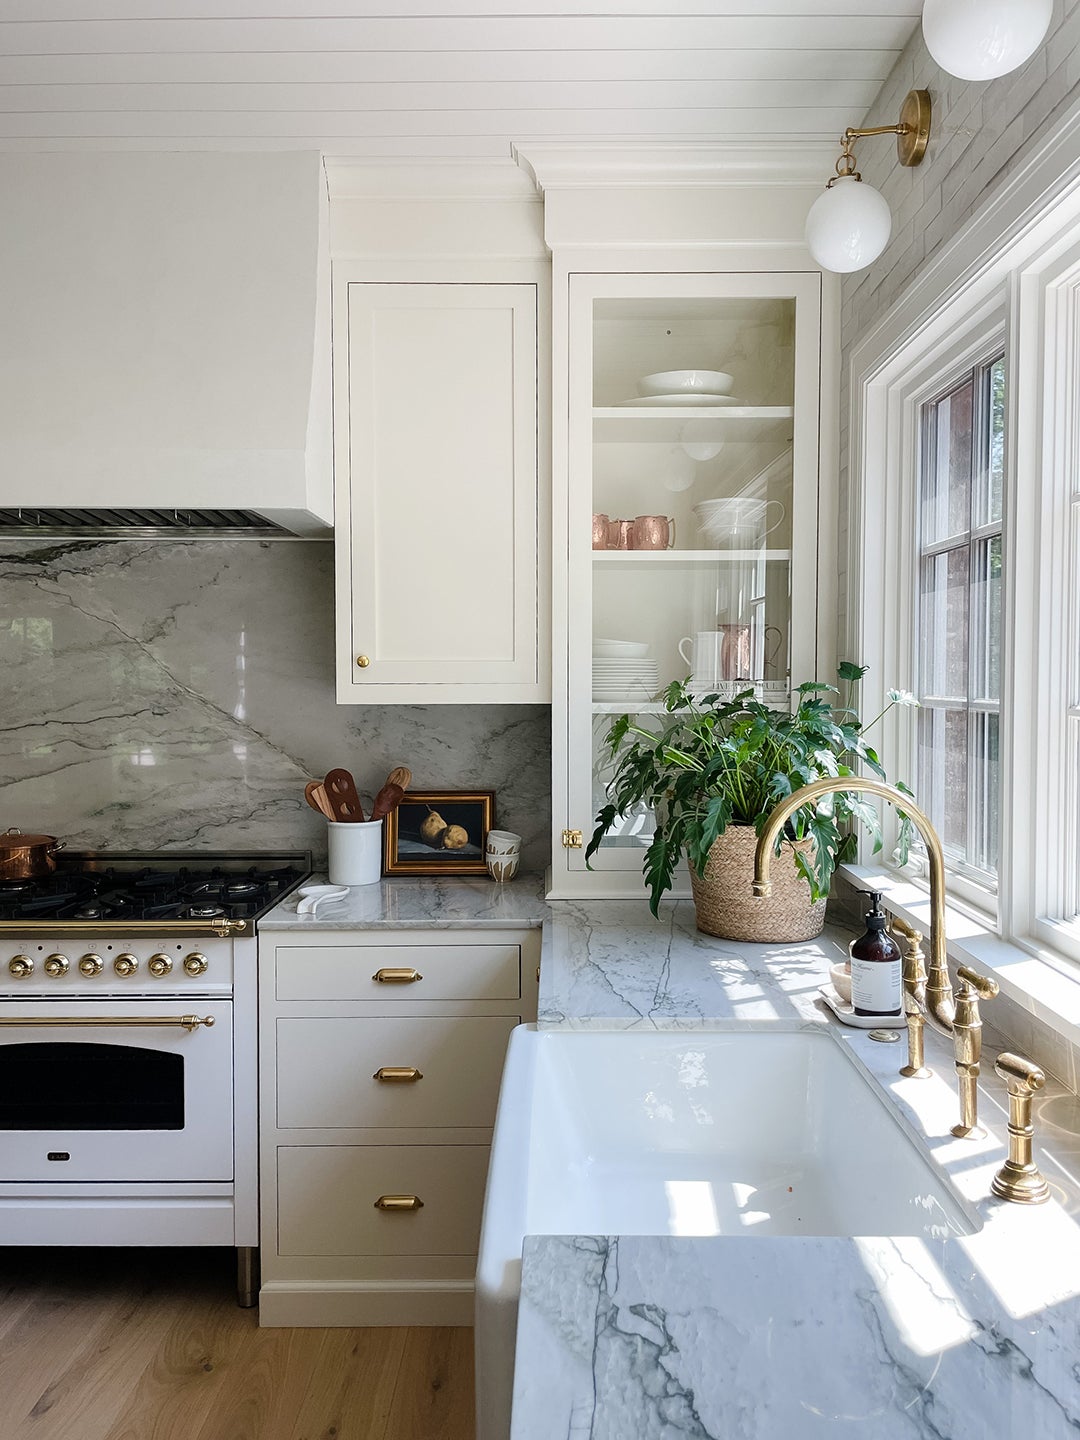 Cream Kitchen Cabinets Don’t Have to Feel Dated—Just Look at These 13